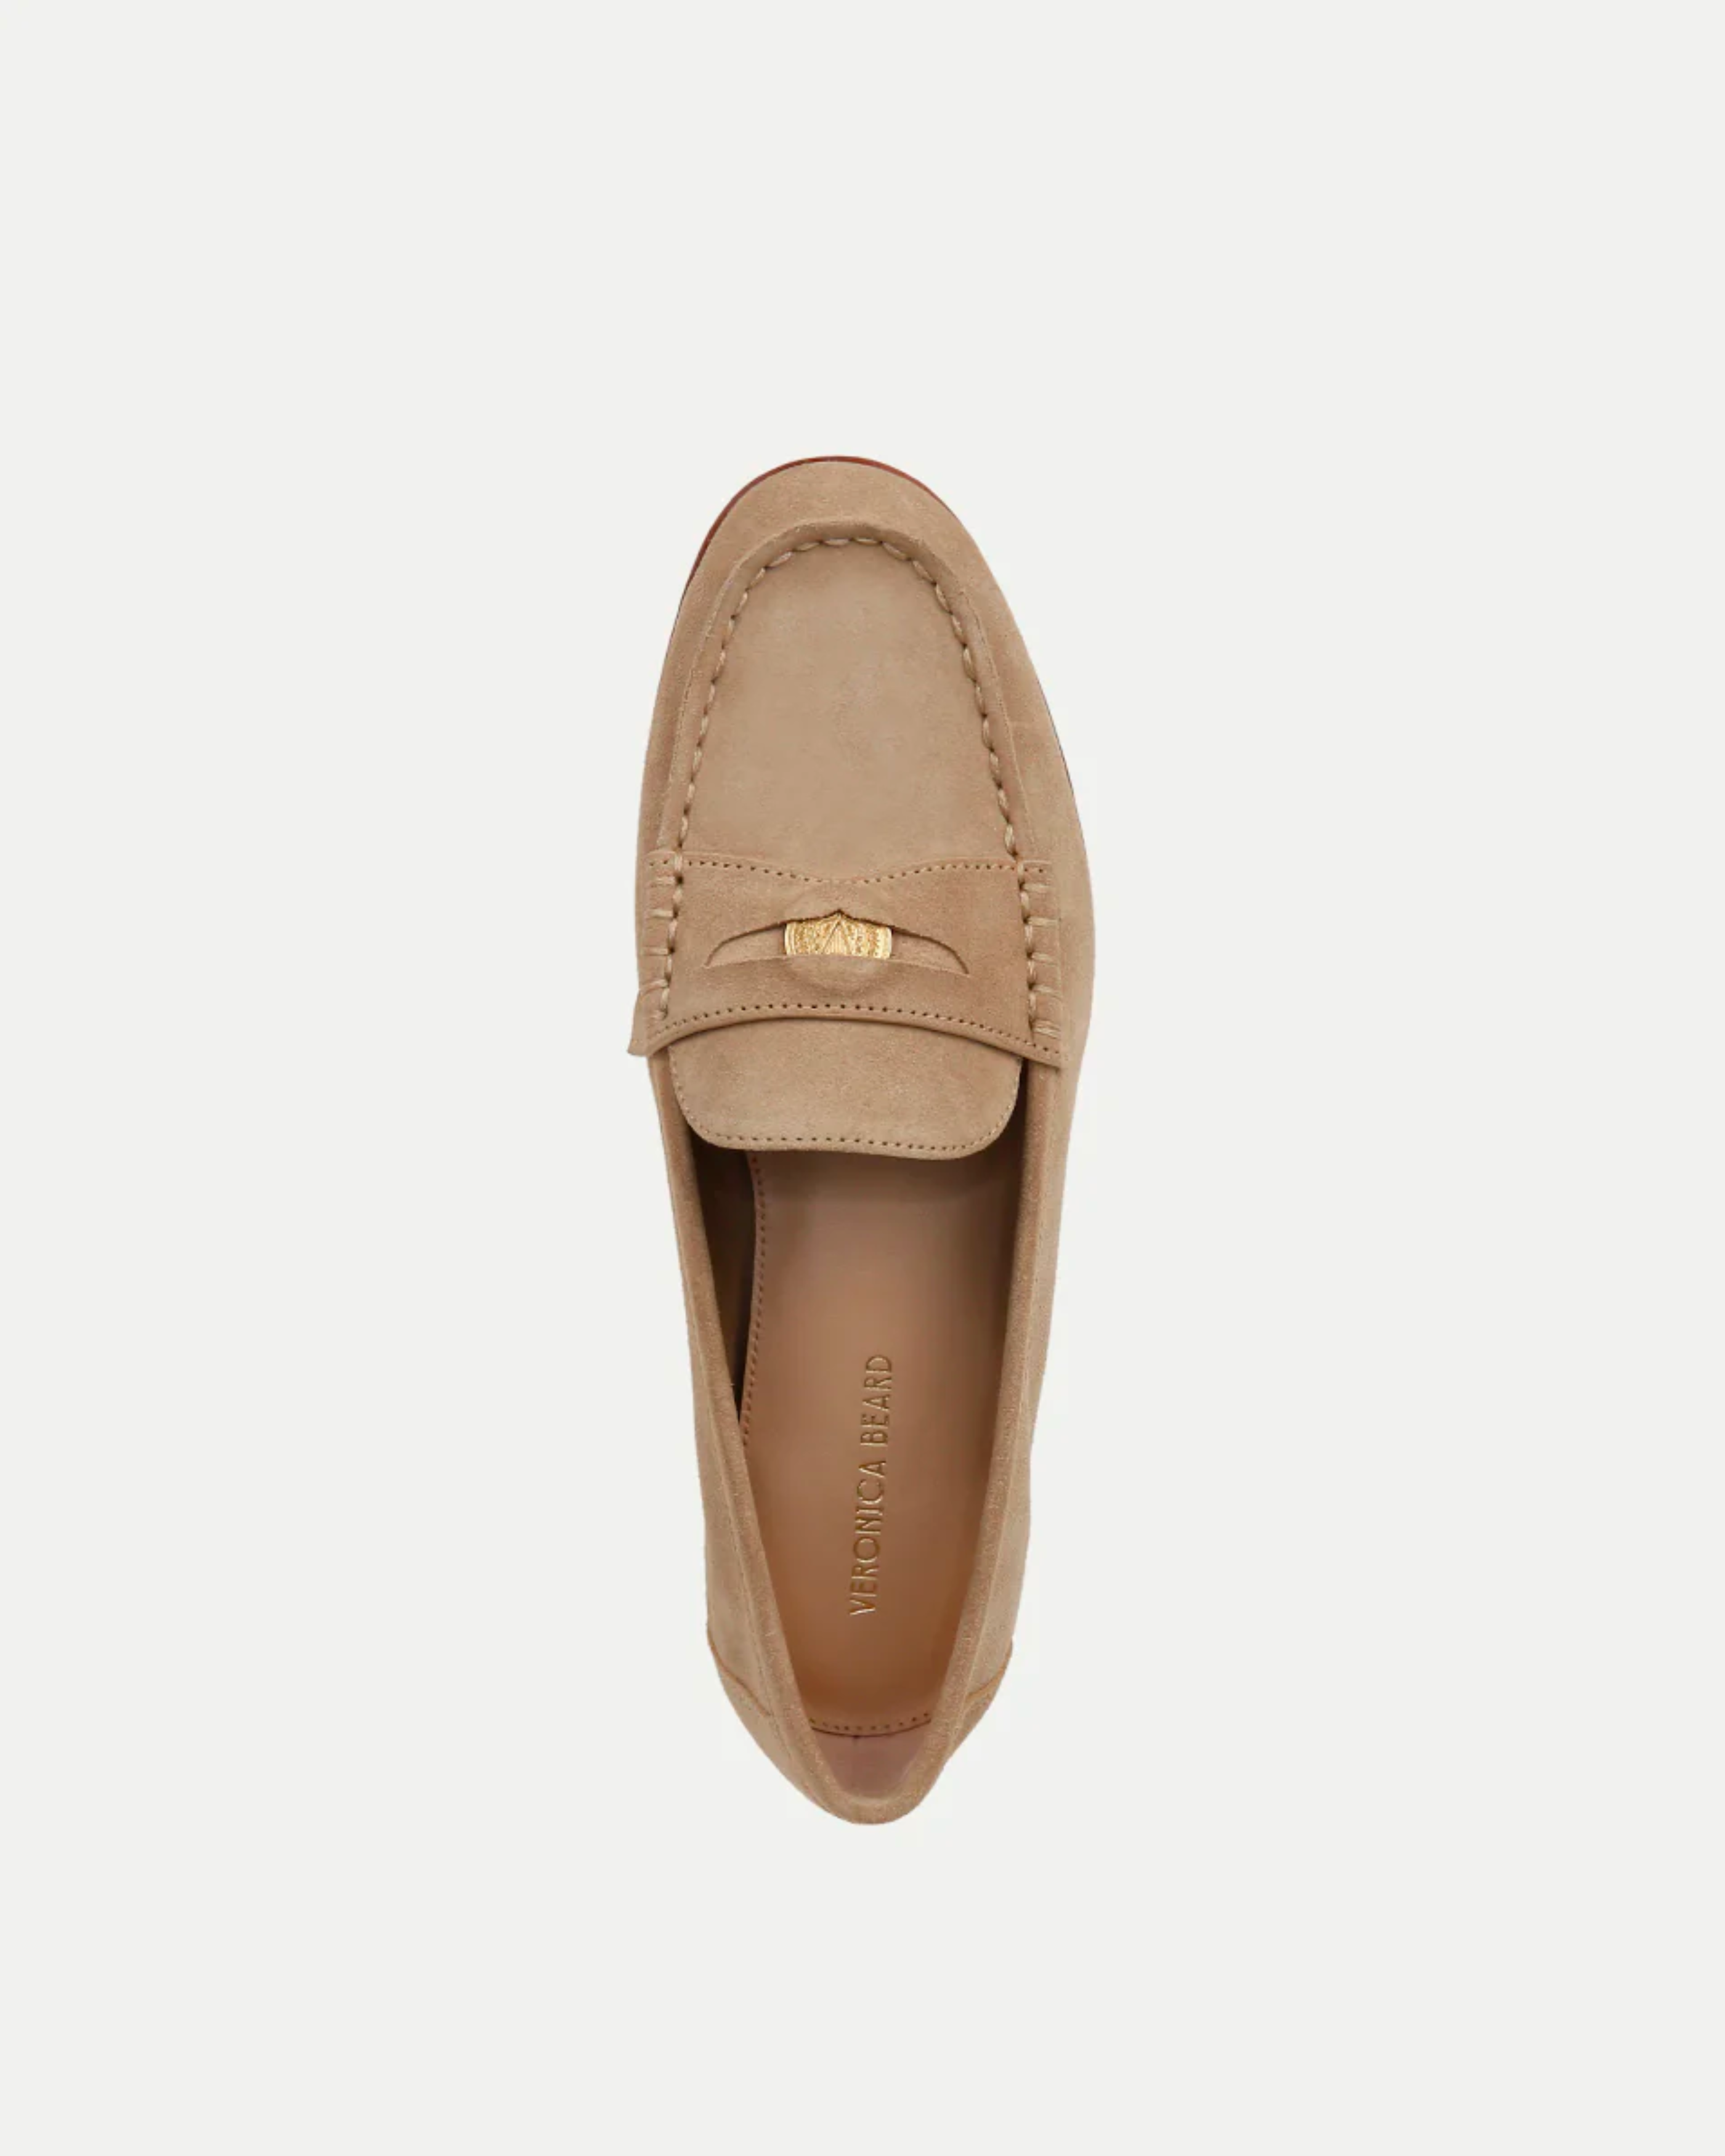 Veronica Beard Penny Loafer in Sand